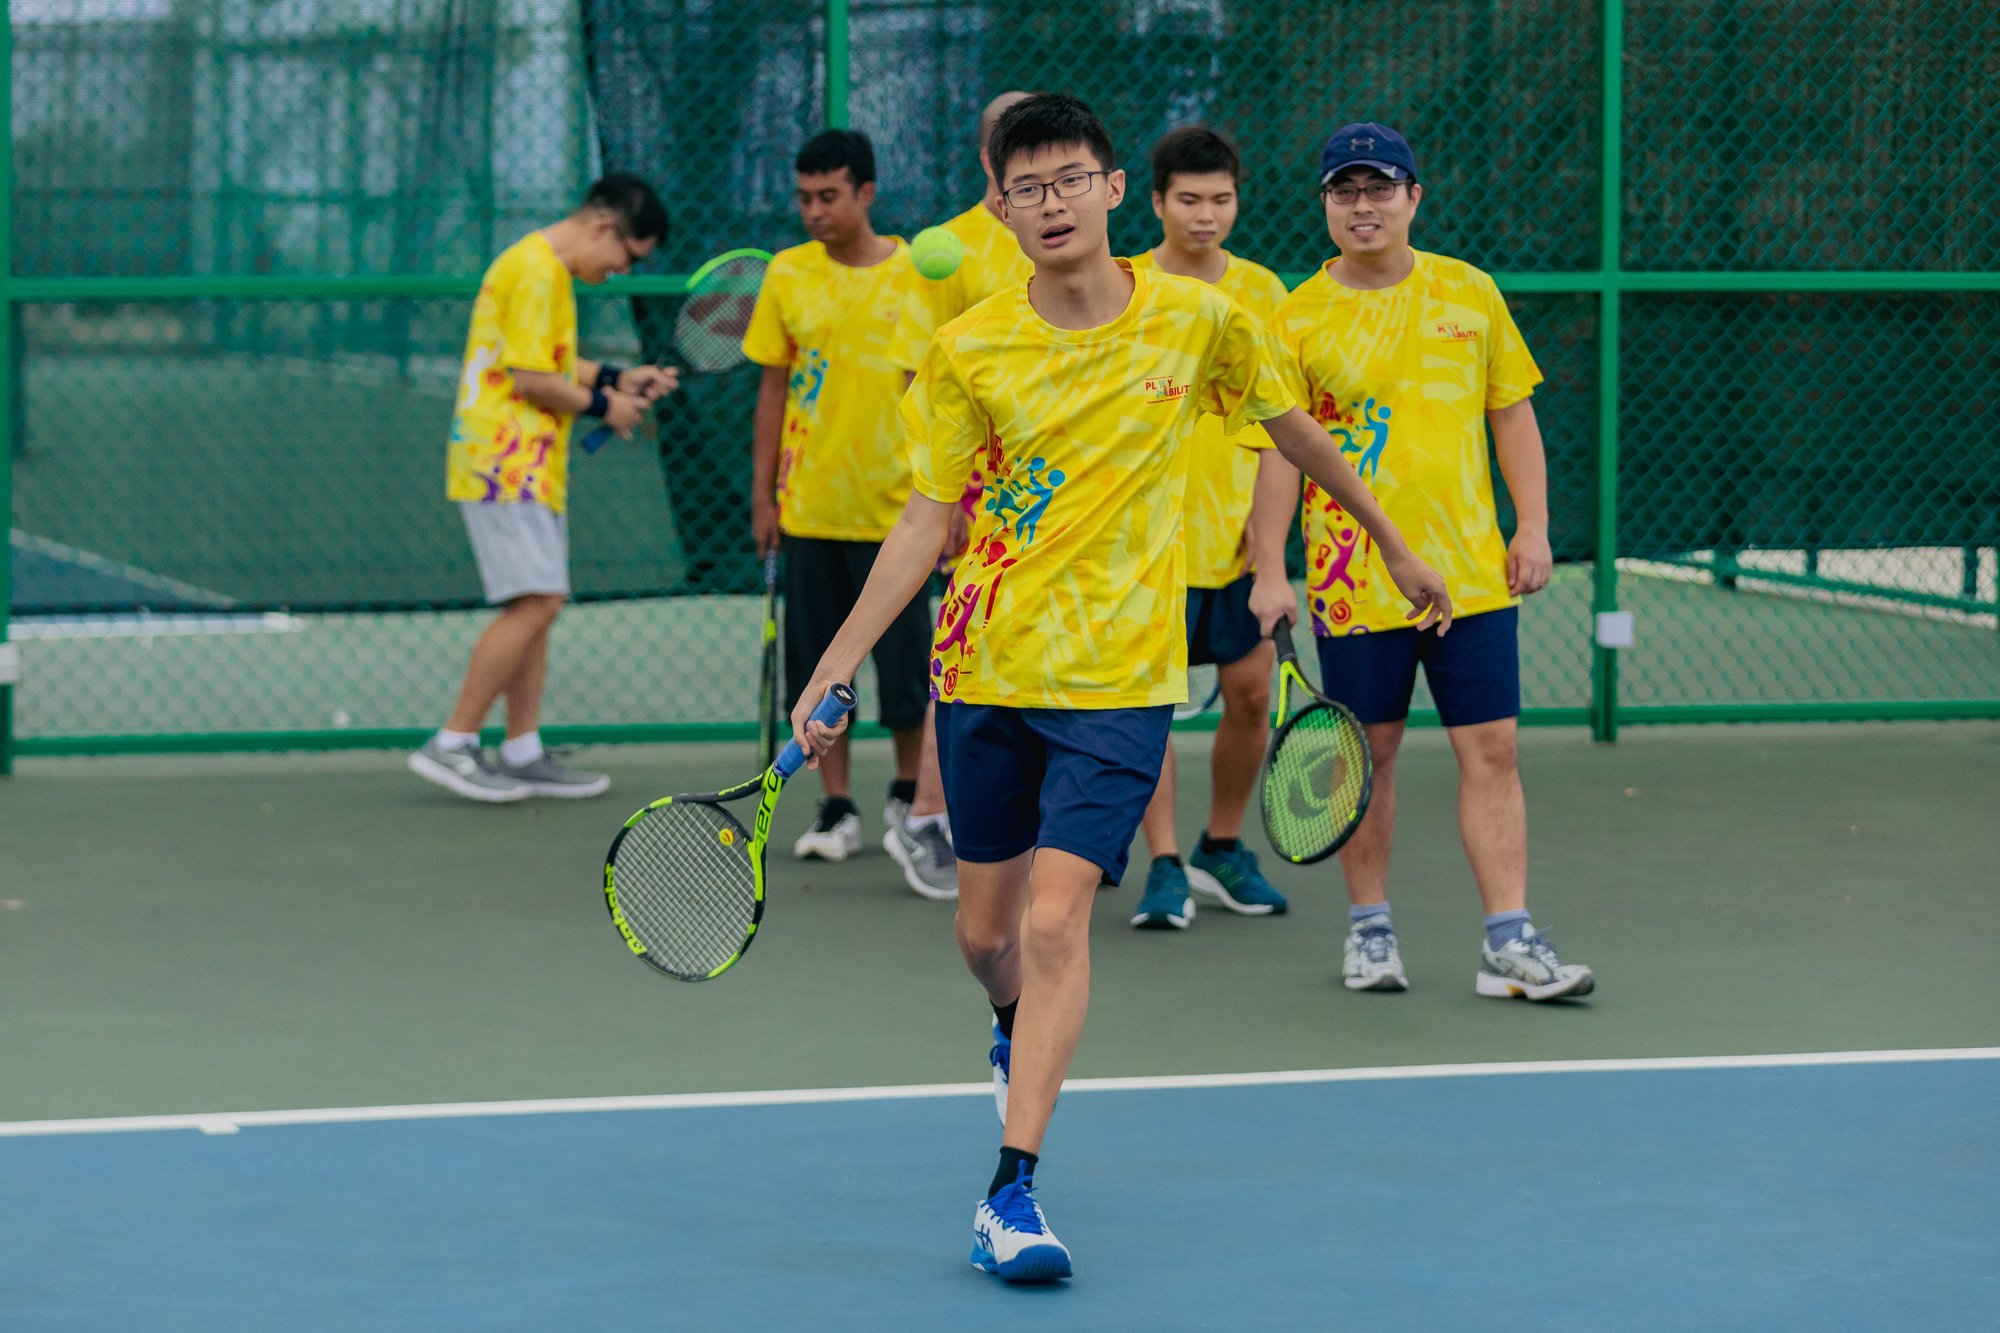 Photo of a group of learners with special needs each holding tennis rackets and taking turns to return a shot